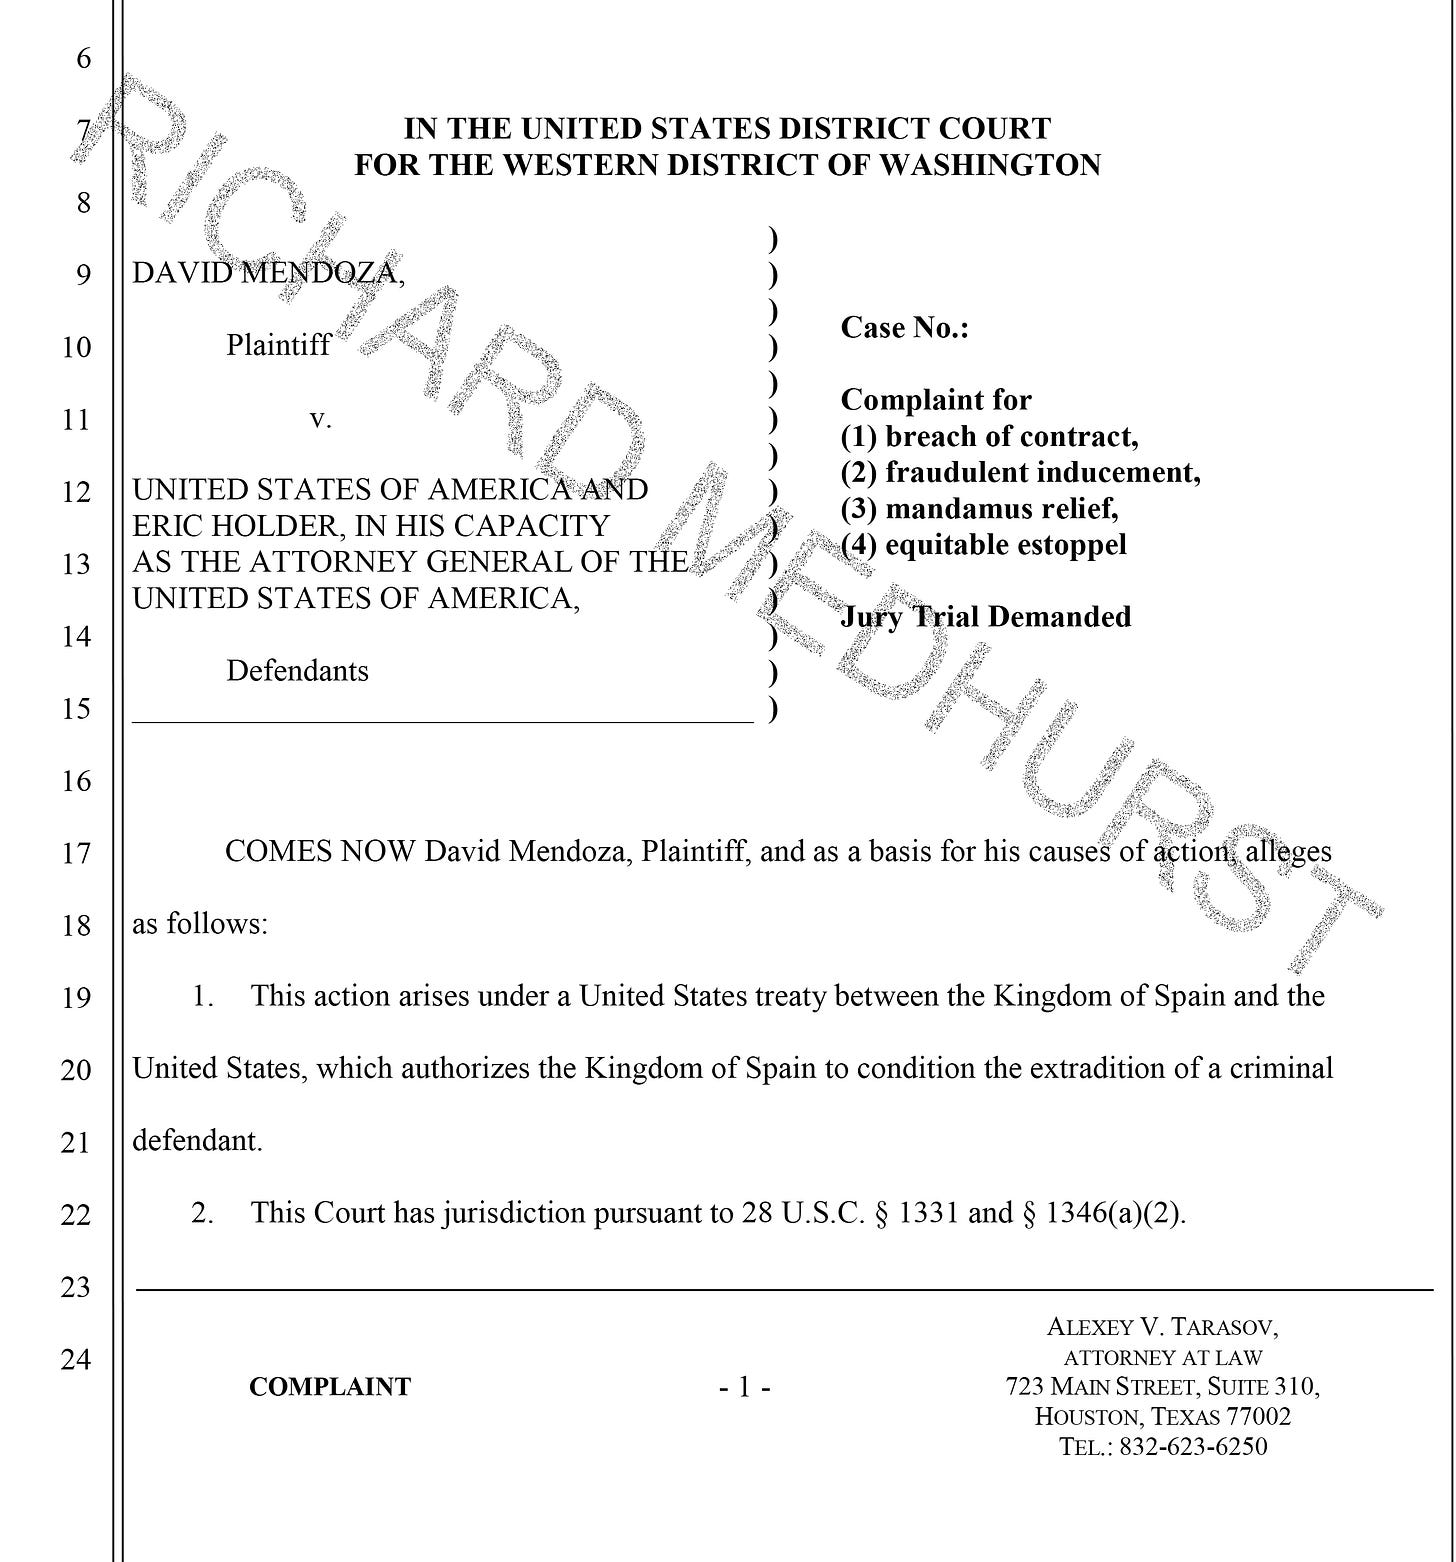 David Mendoza’s civil suit against the United States Department of Justice and Attorney General Eric Holder for breaching the conditions of his extradition from Spain to the United States